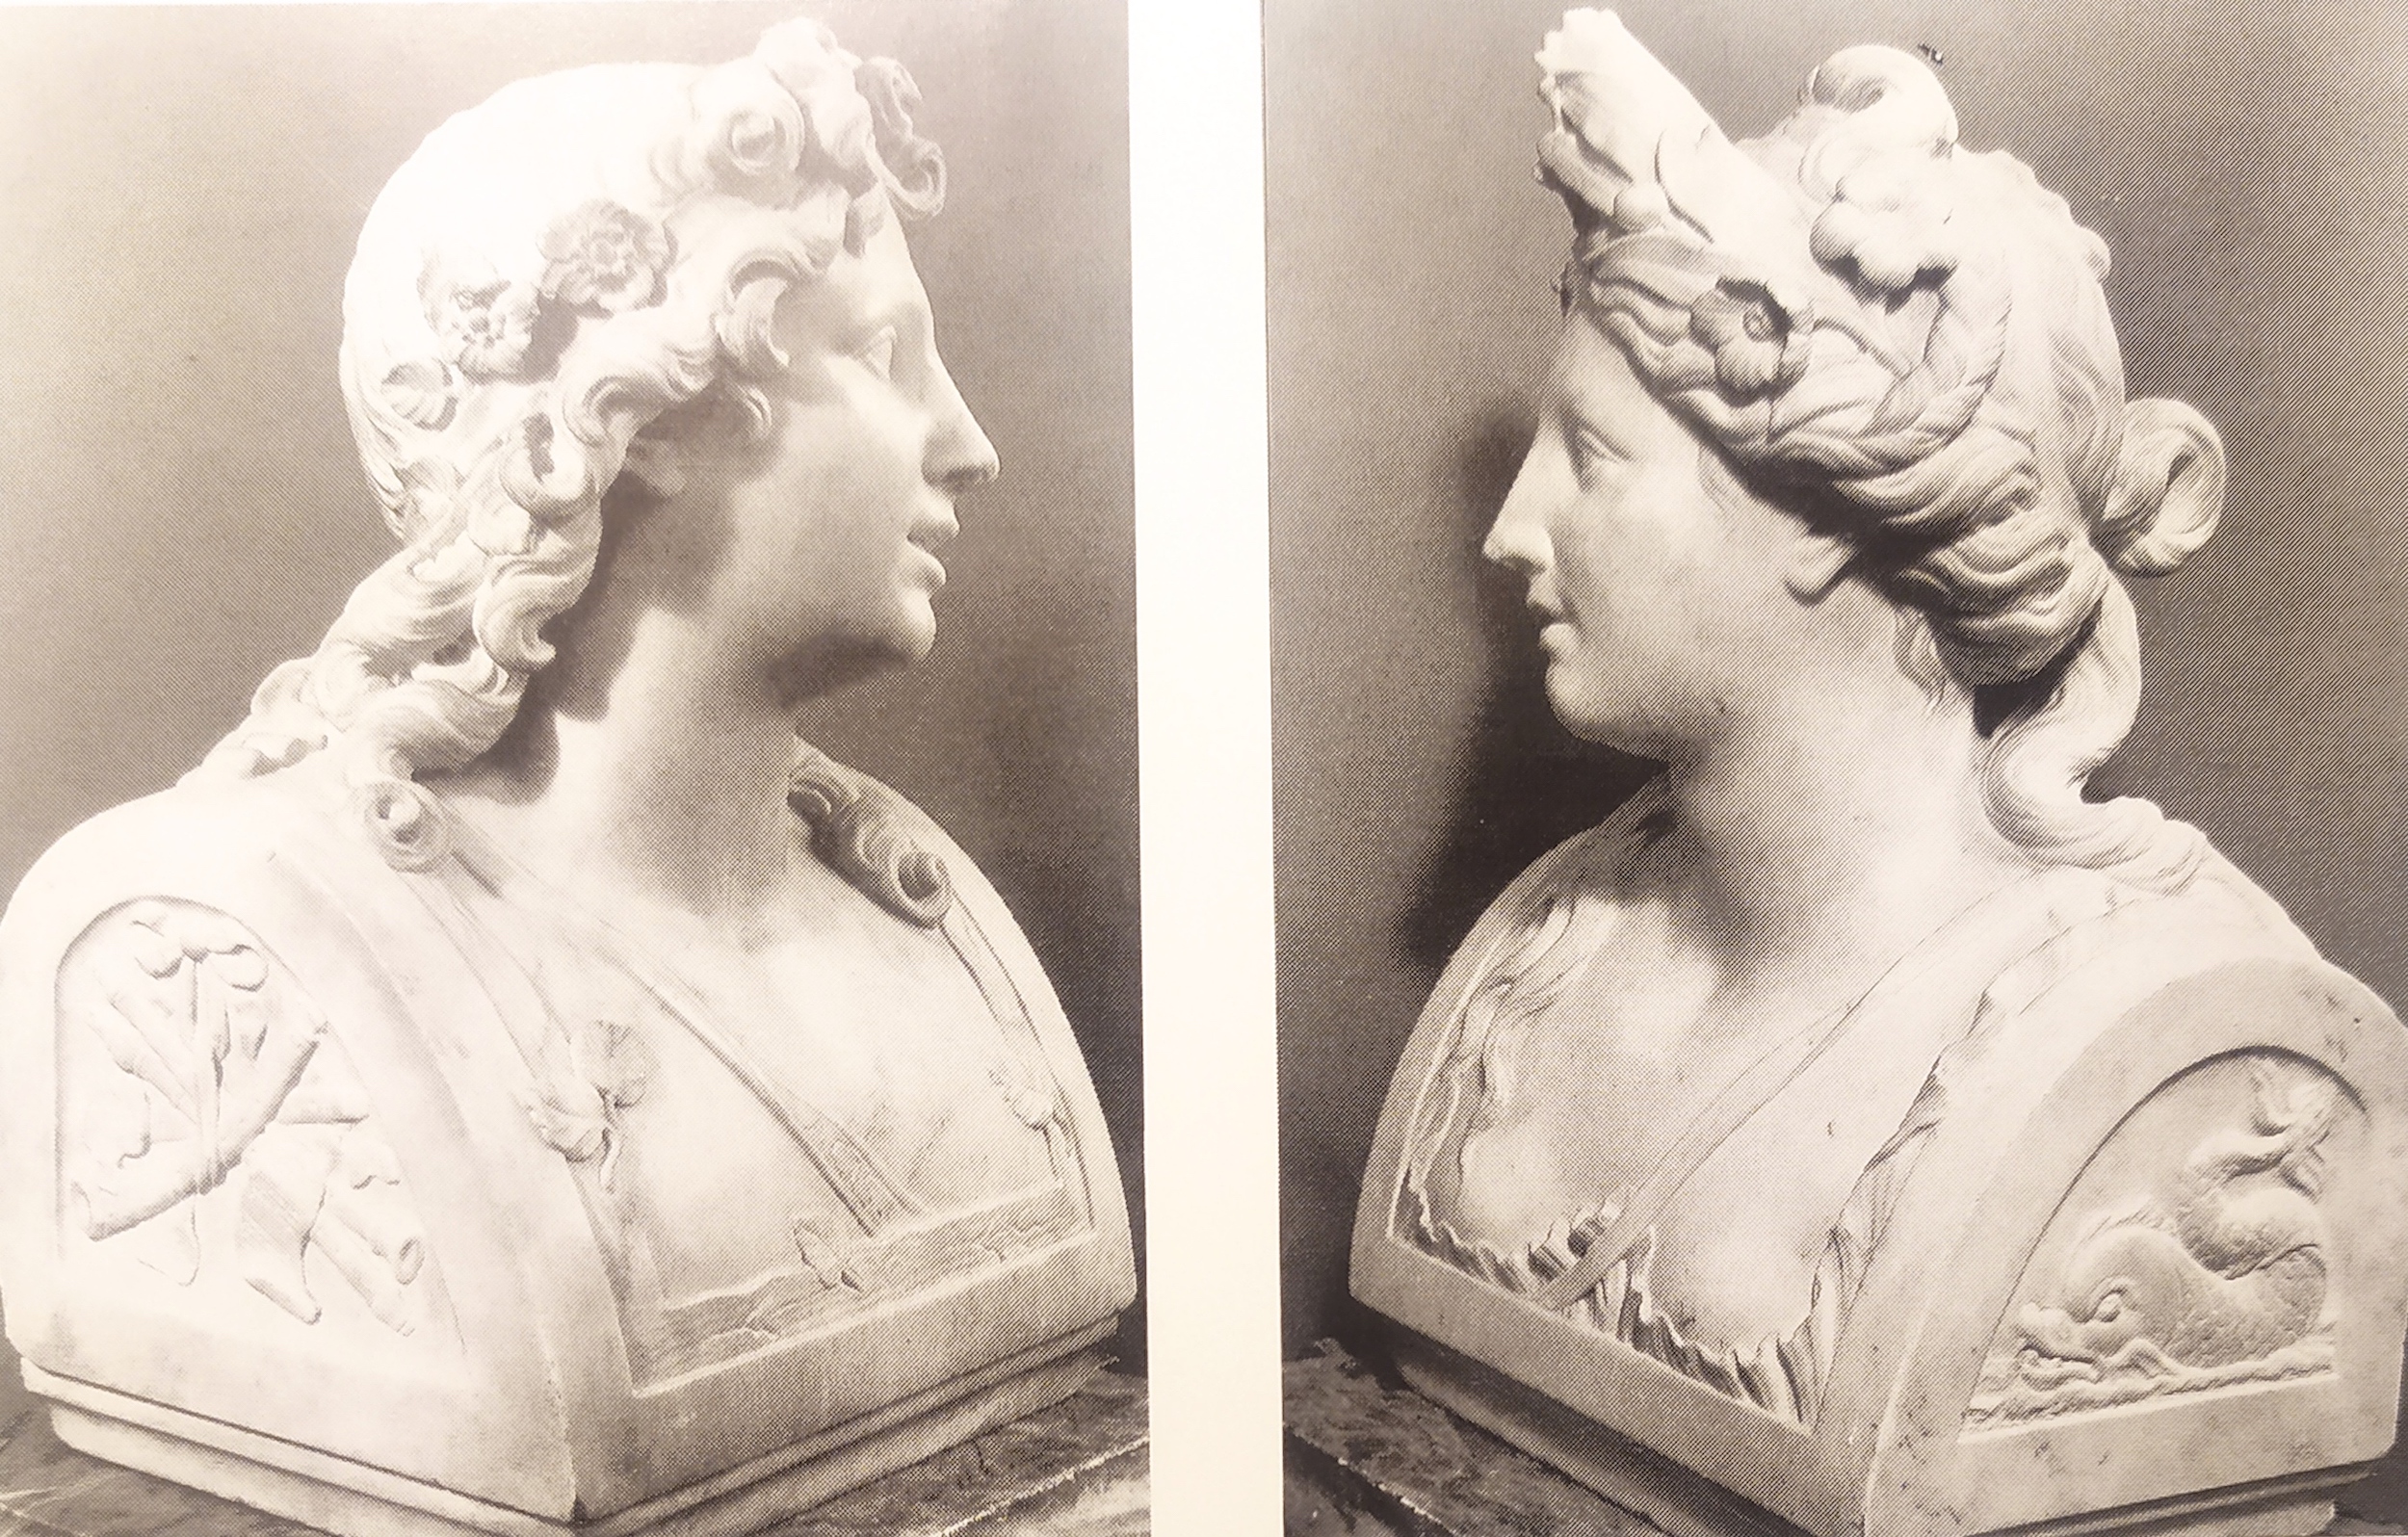 Jean Raon (1630-1707), Acis et Galatée. Marbre. Collection Alain Moatti. © Photo : French sculptors of the 17th and 18th centuries: the reign of Louis XIV